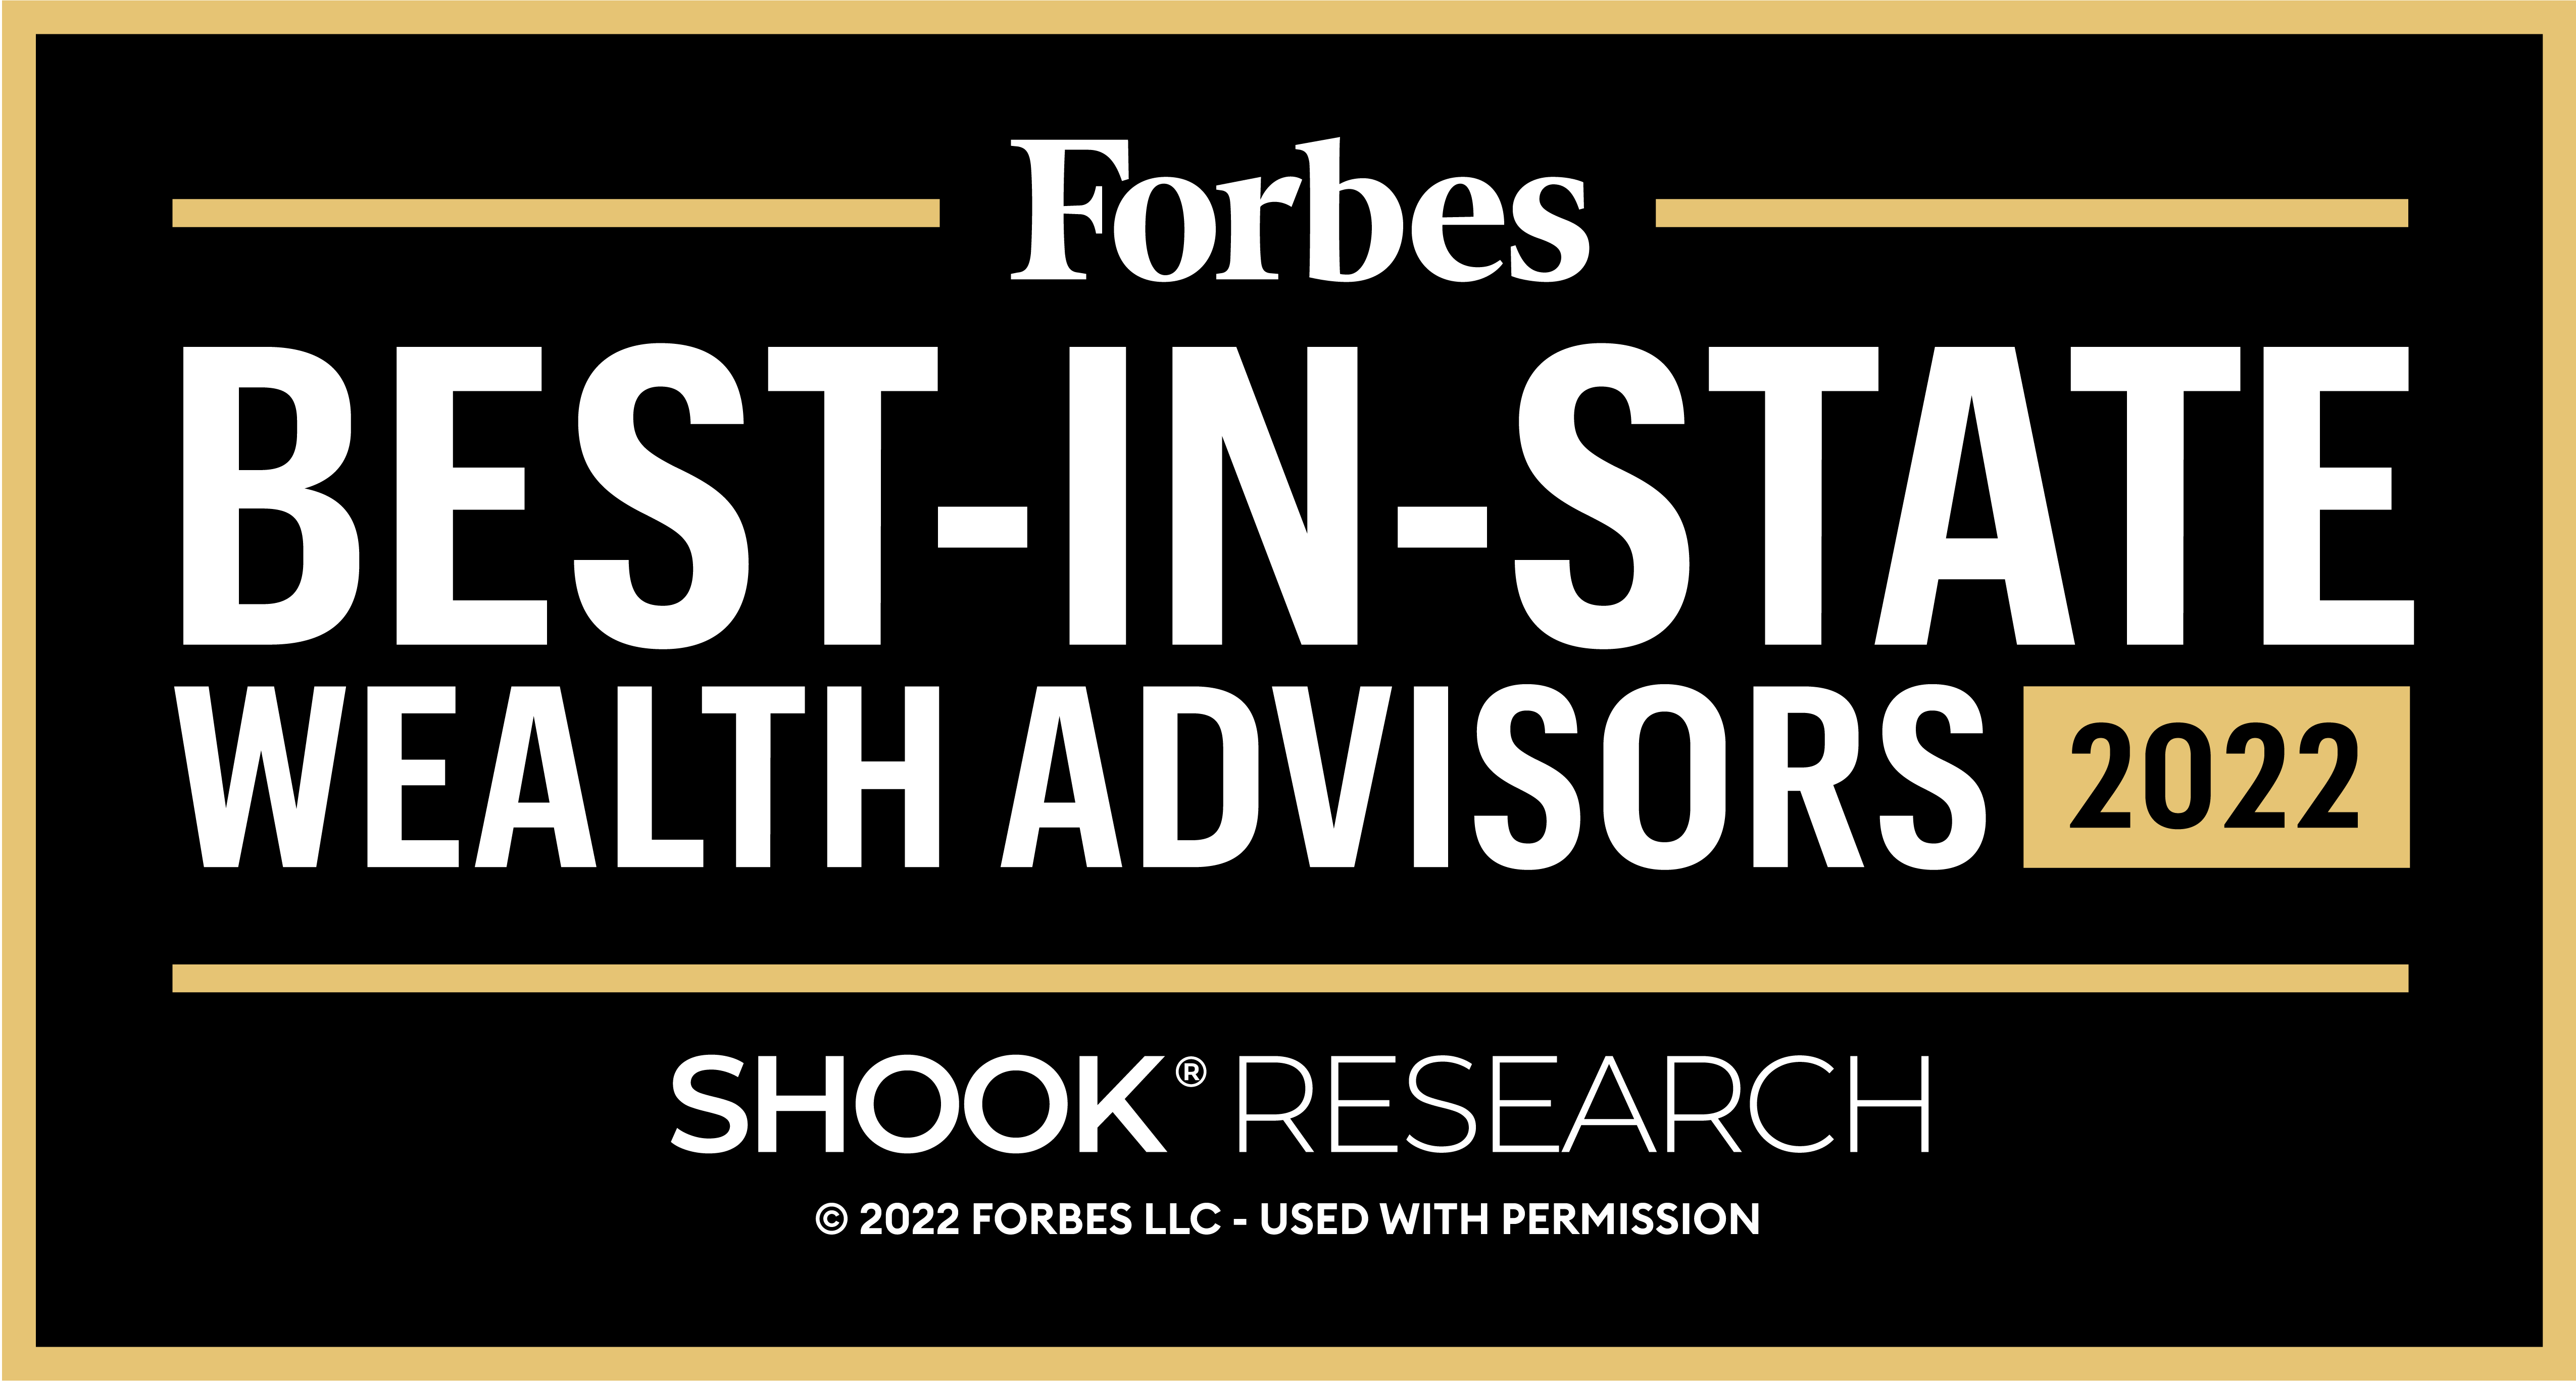 Forbes Best-in-State Wealth Advisors Award